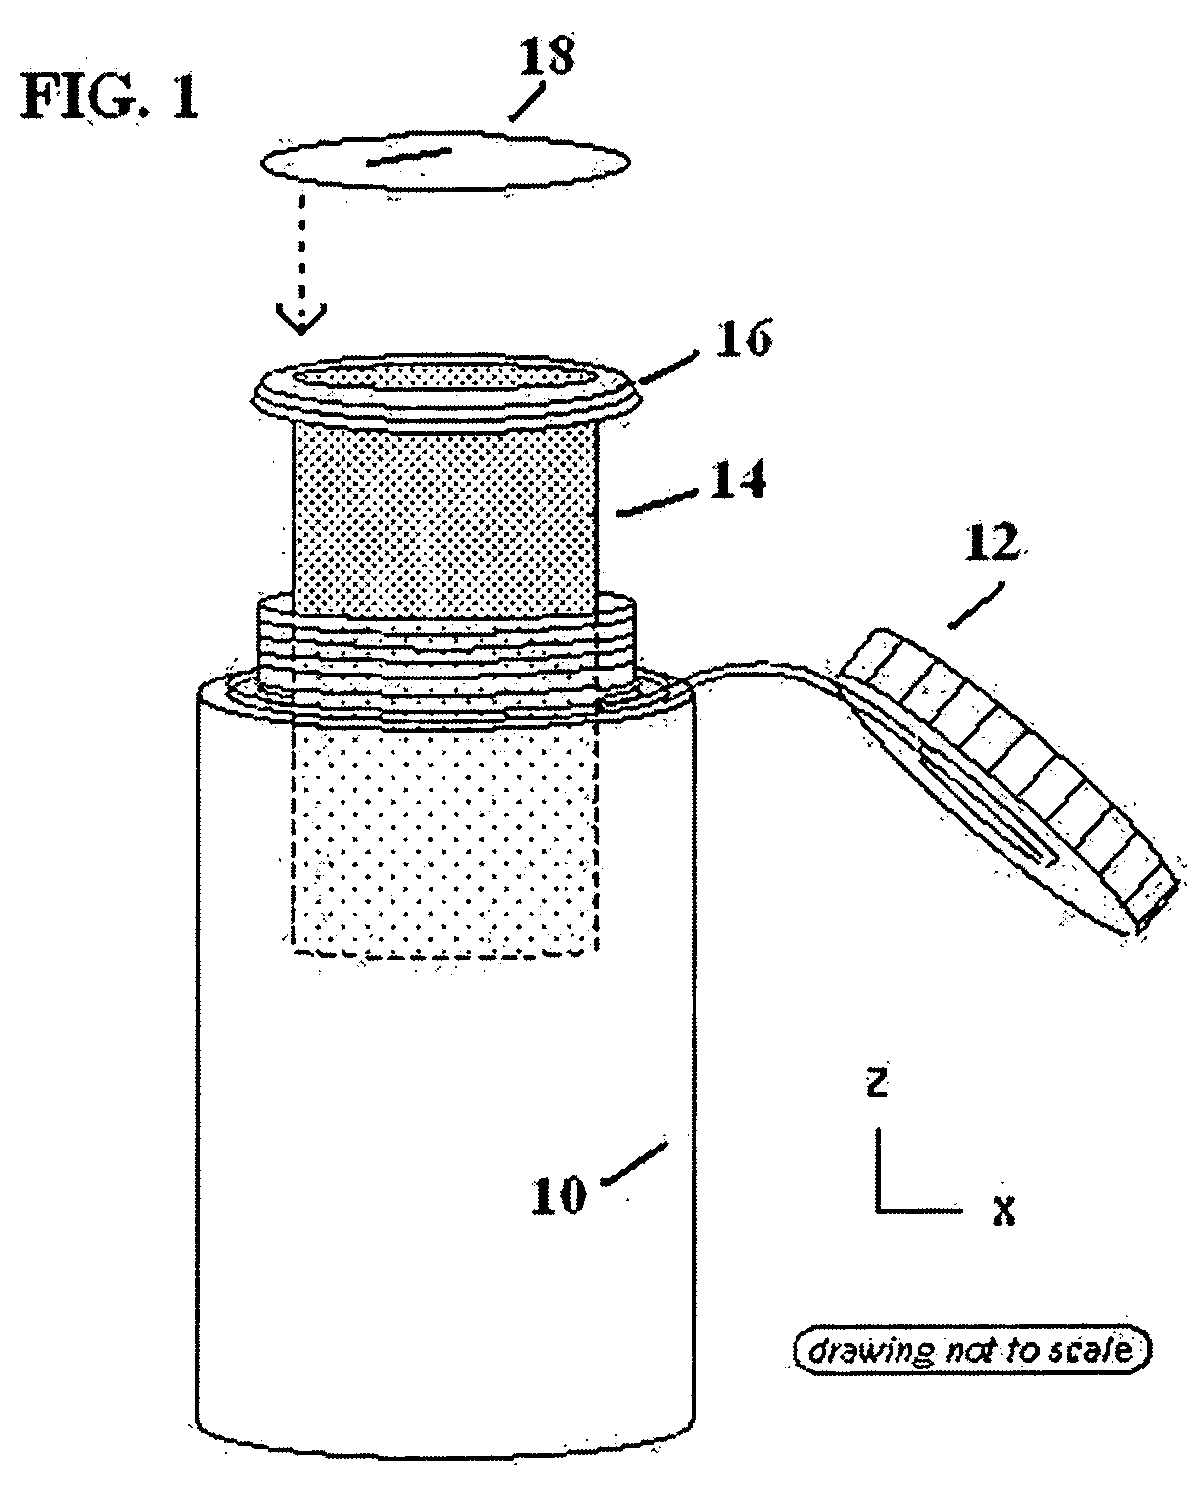 Portable brewing system